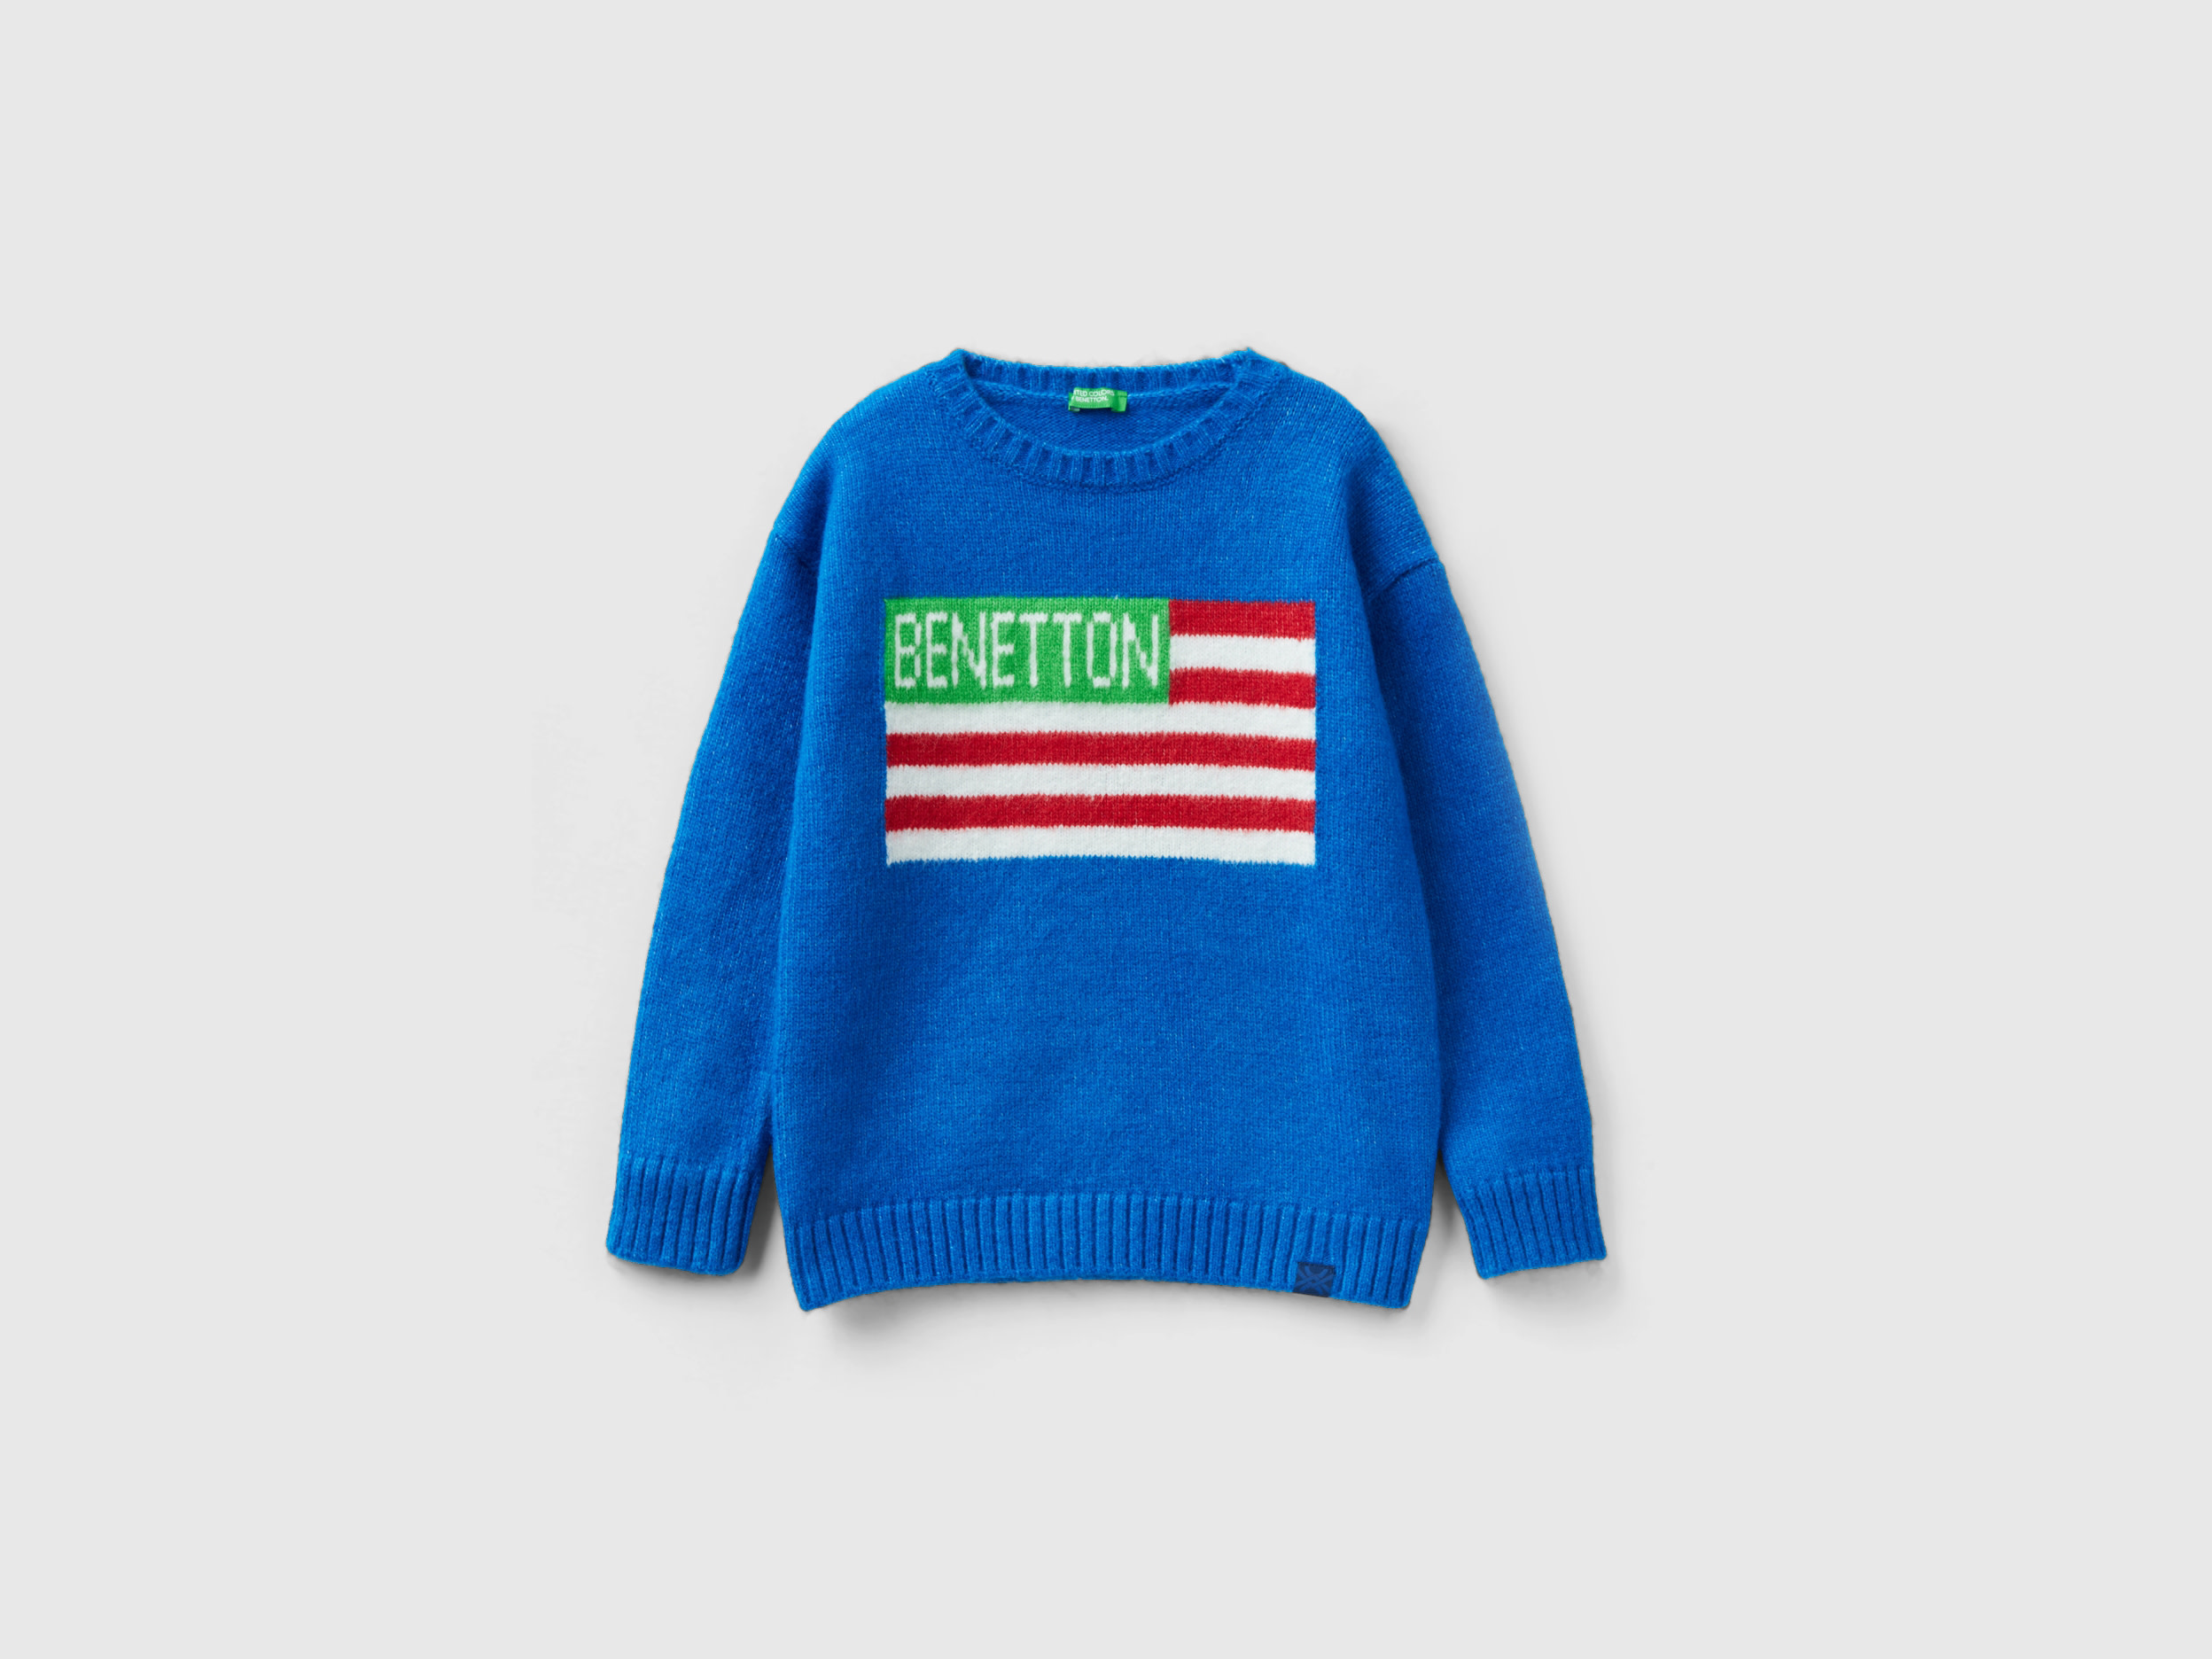 Benetton, Sweater With Flag Inlay, size L, Bright Blue, Kids